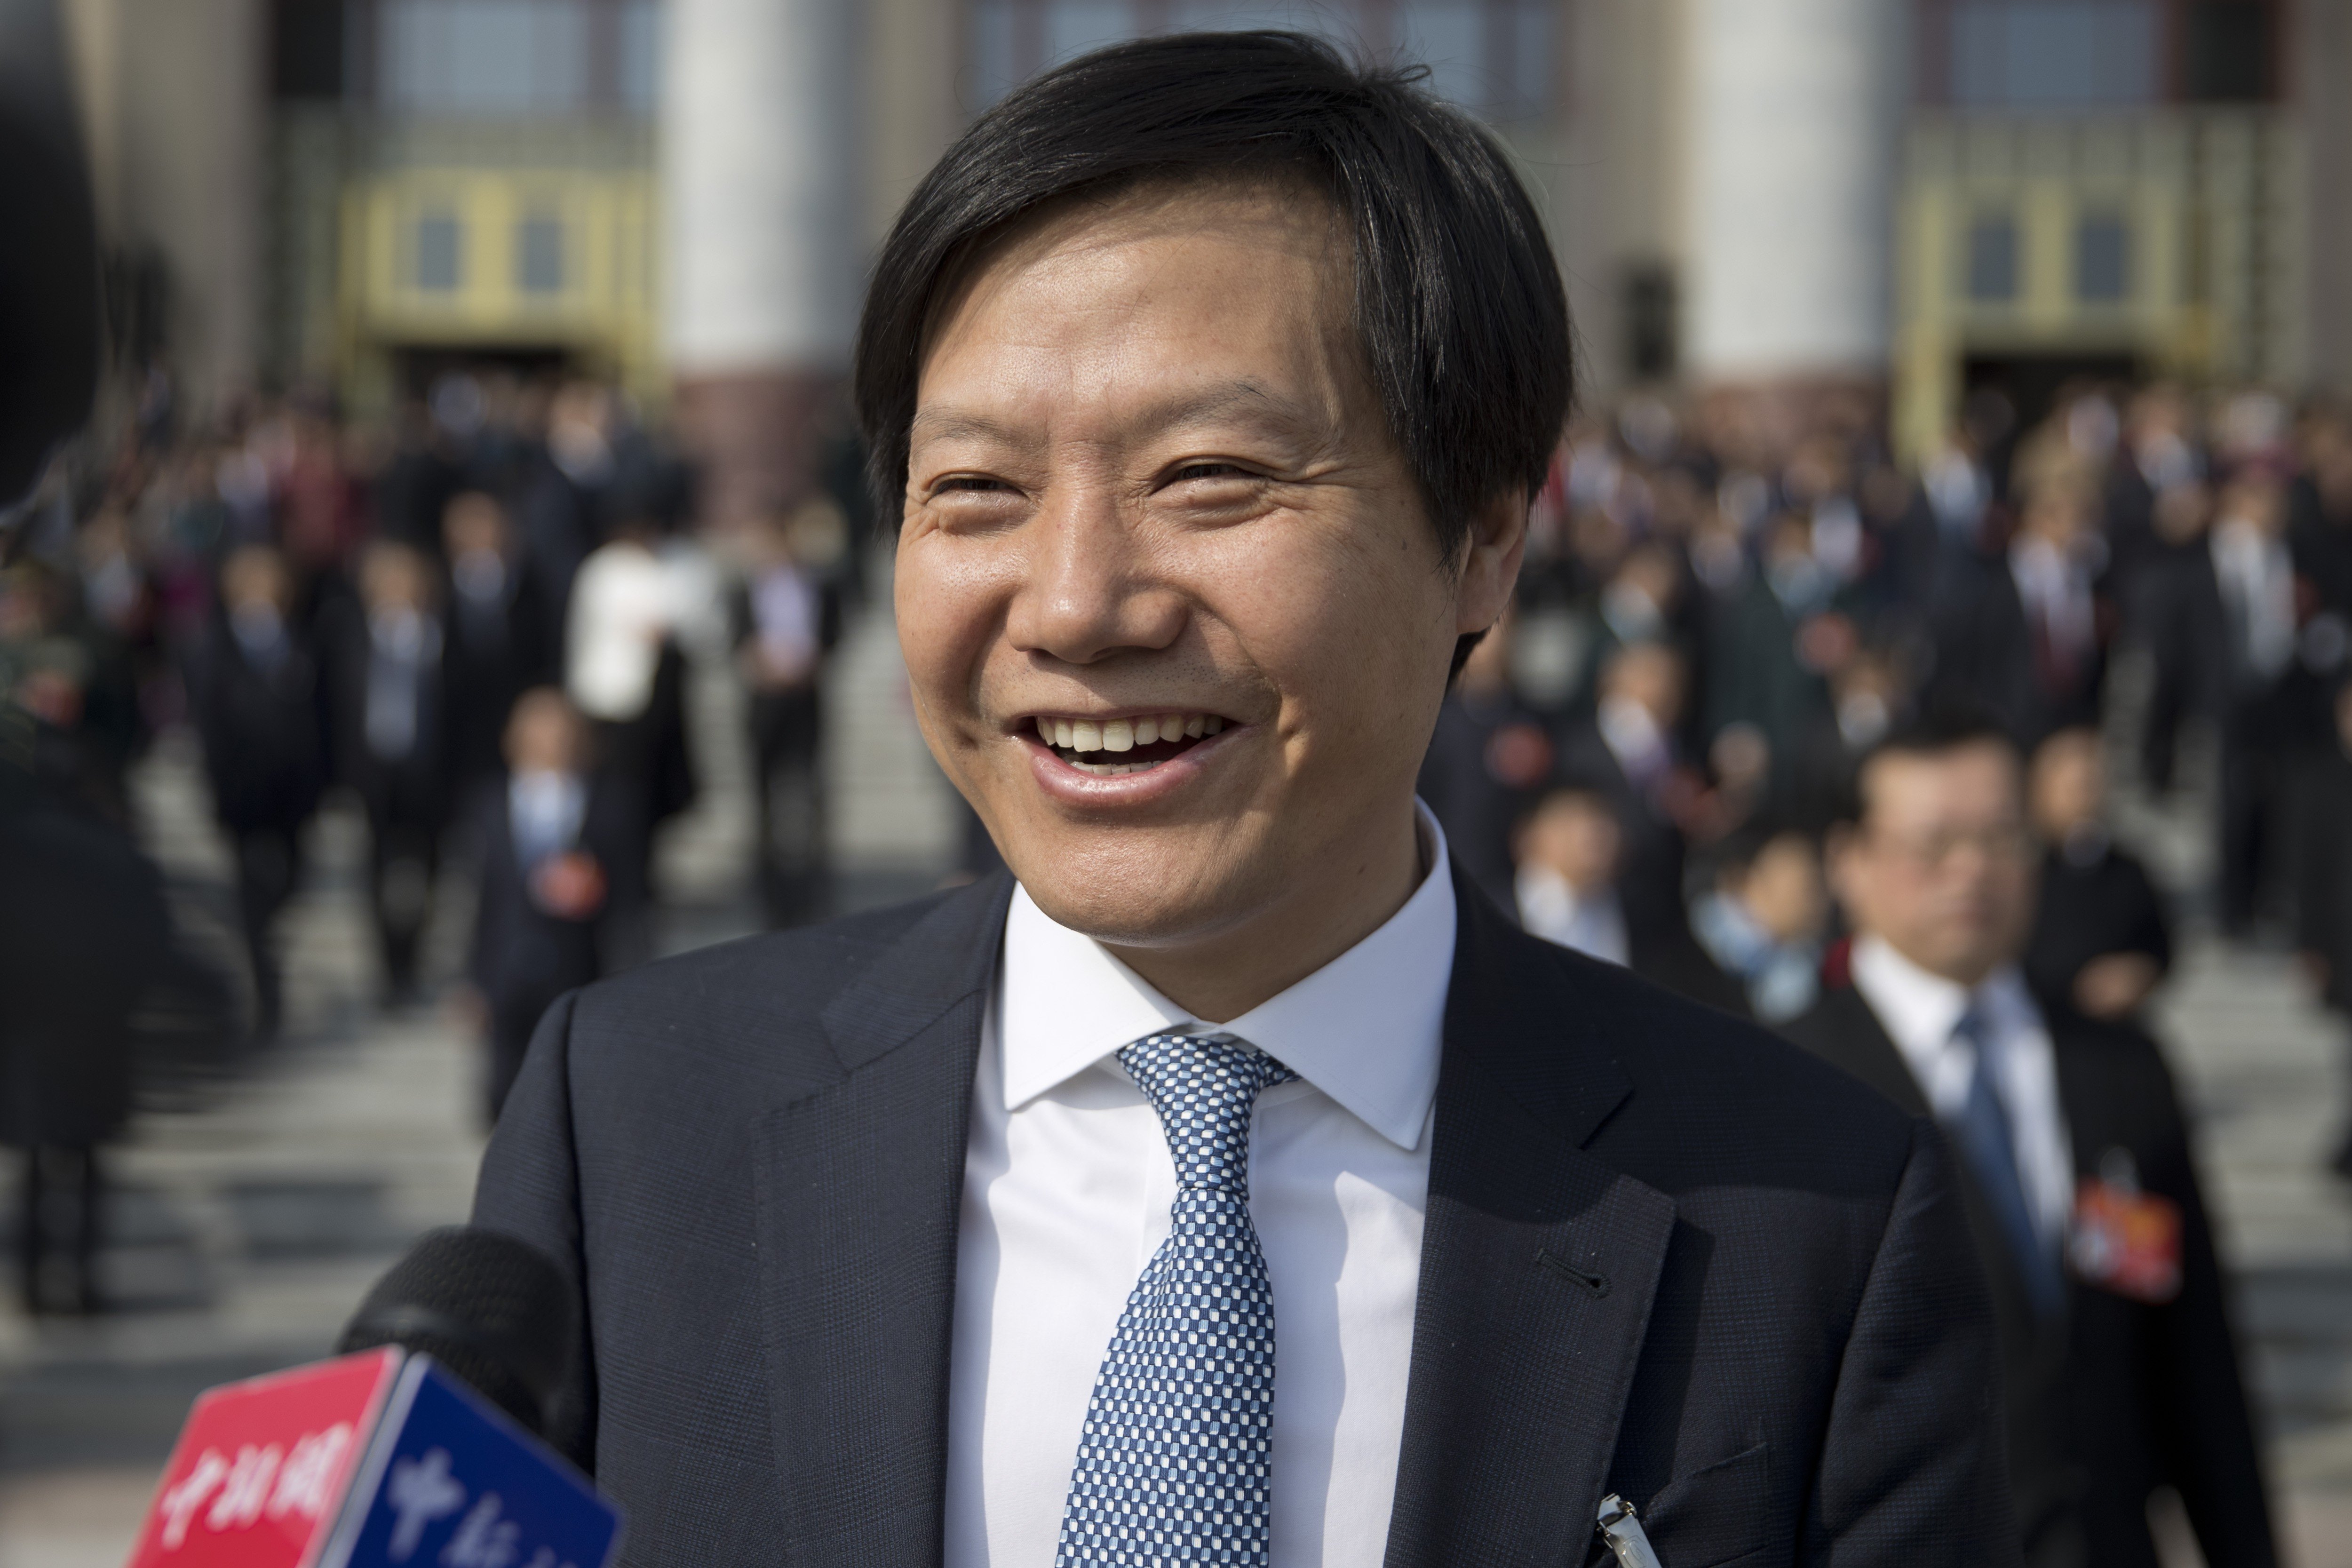 Xiaomi founder, chairman and chief executive Lei Jun speaks with journalists as he leaves a meeting one day ahead of the opening session of China's National People's Congress in Beijing on March 4, 2019. Photo: AP